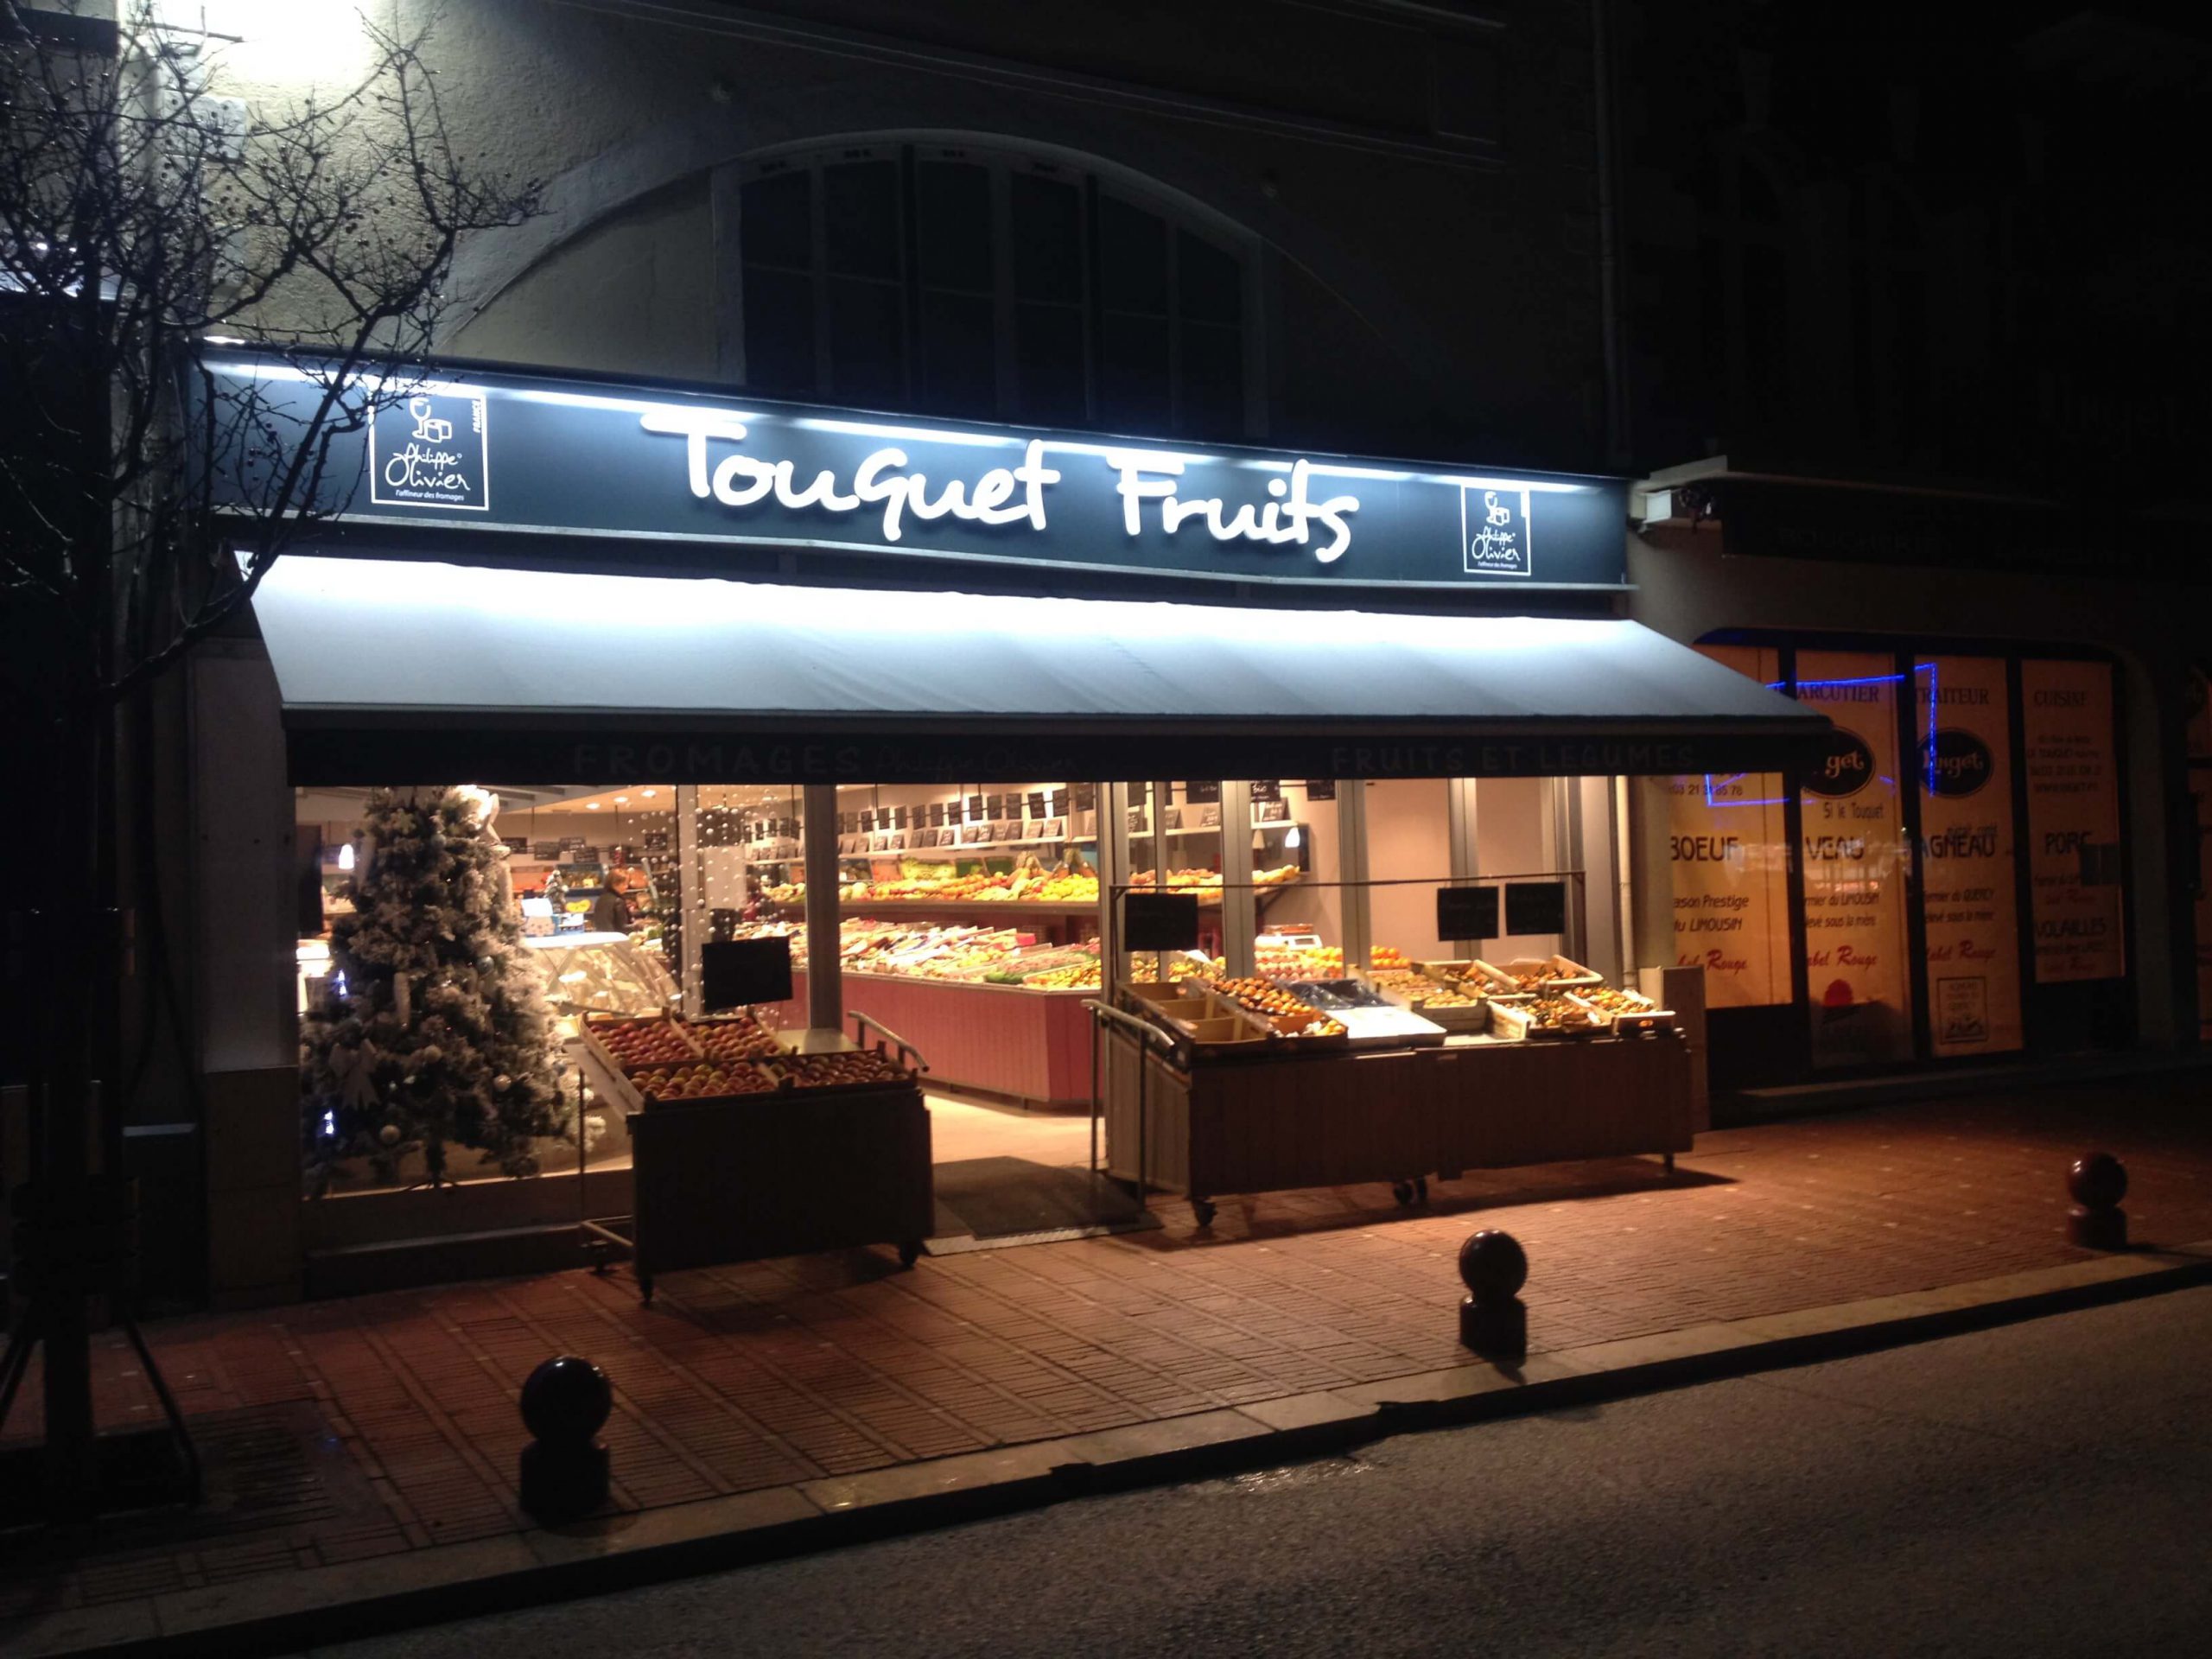 Touquet Fruits by night